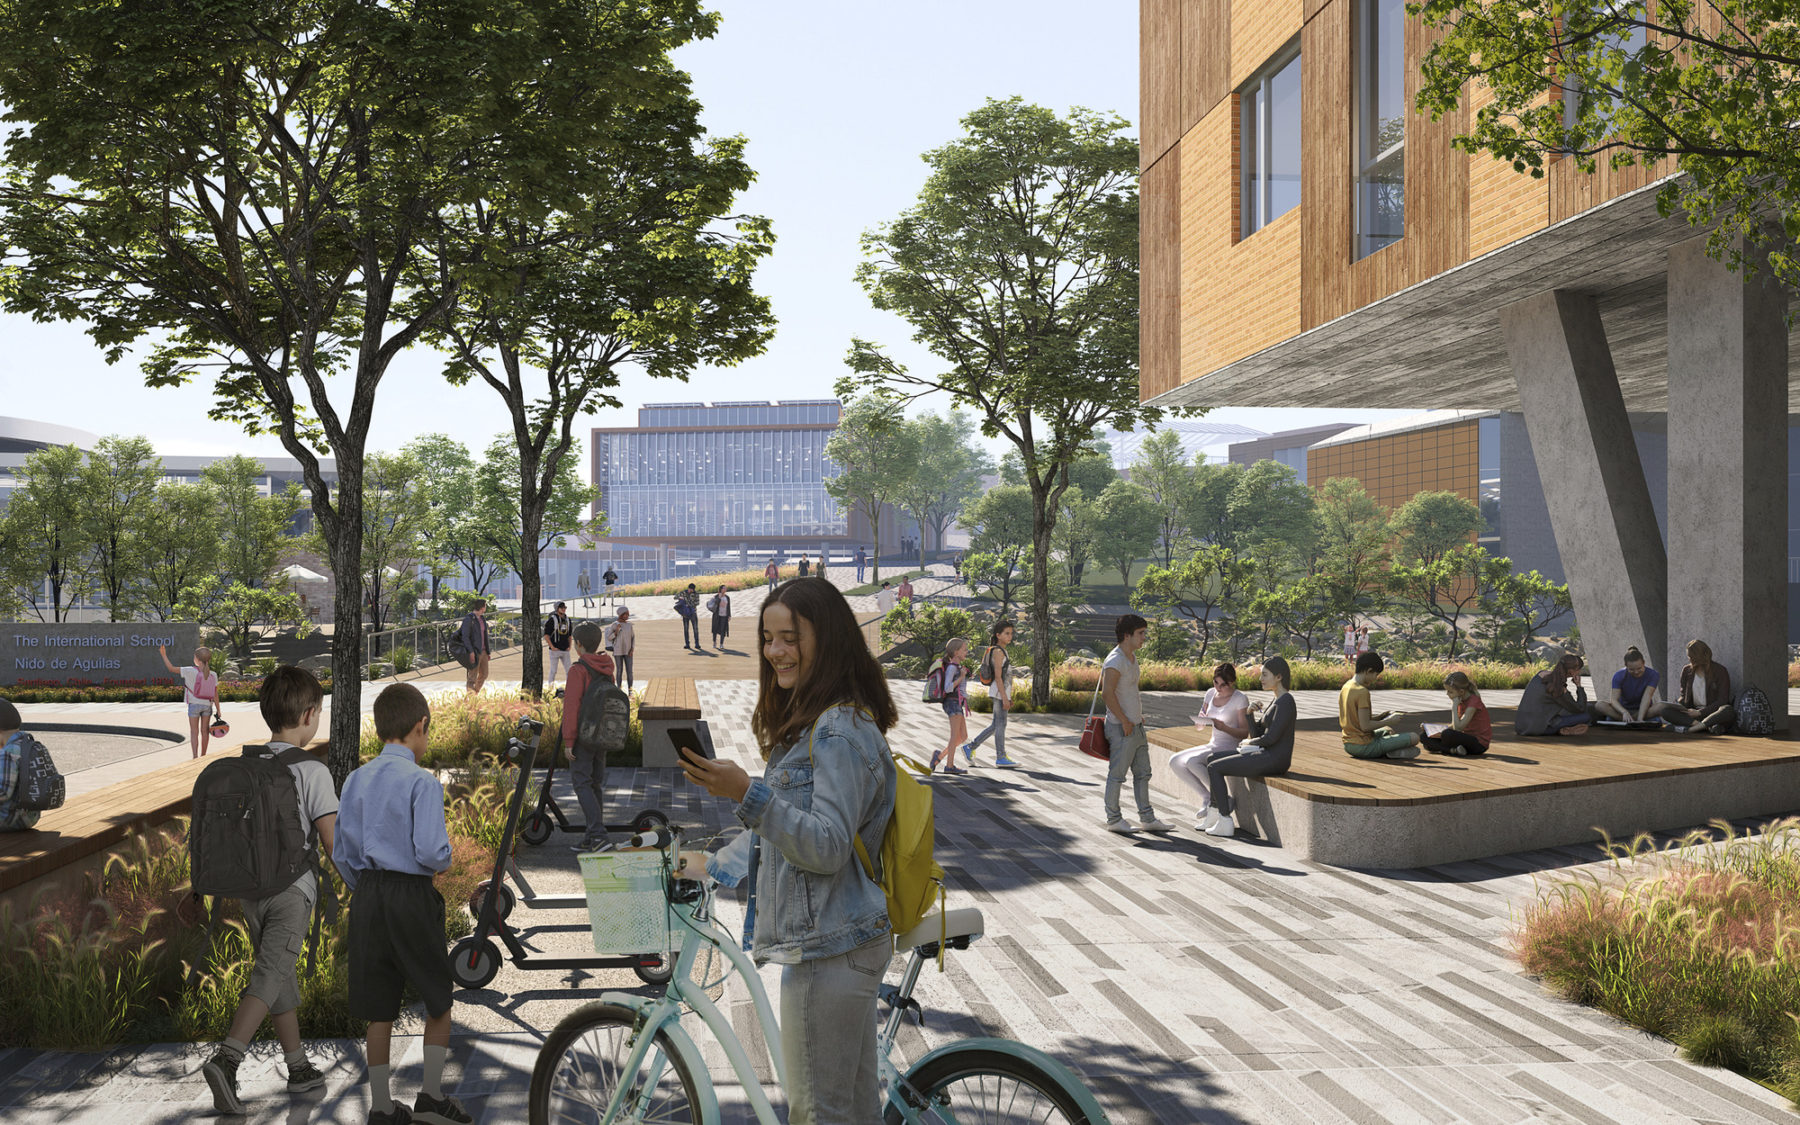 rendering of campus vision showing pedestrian promenade. A girl stands in the foreground smiling down at her phone. She's wearing a jean jacket, yellow backpack, and standing holding her bike.